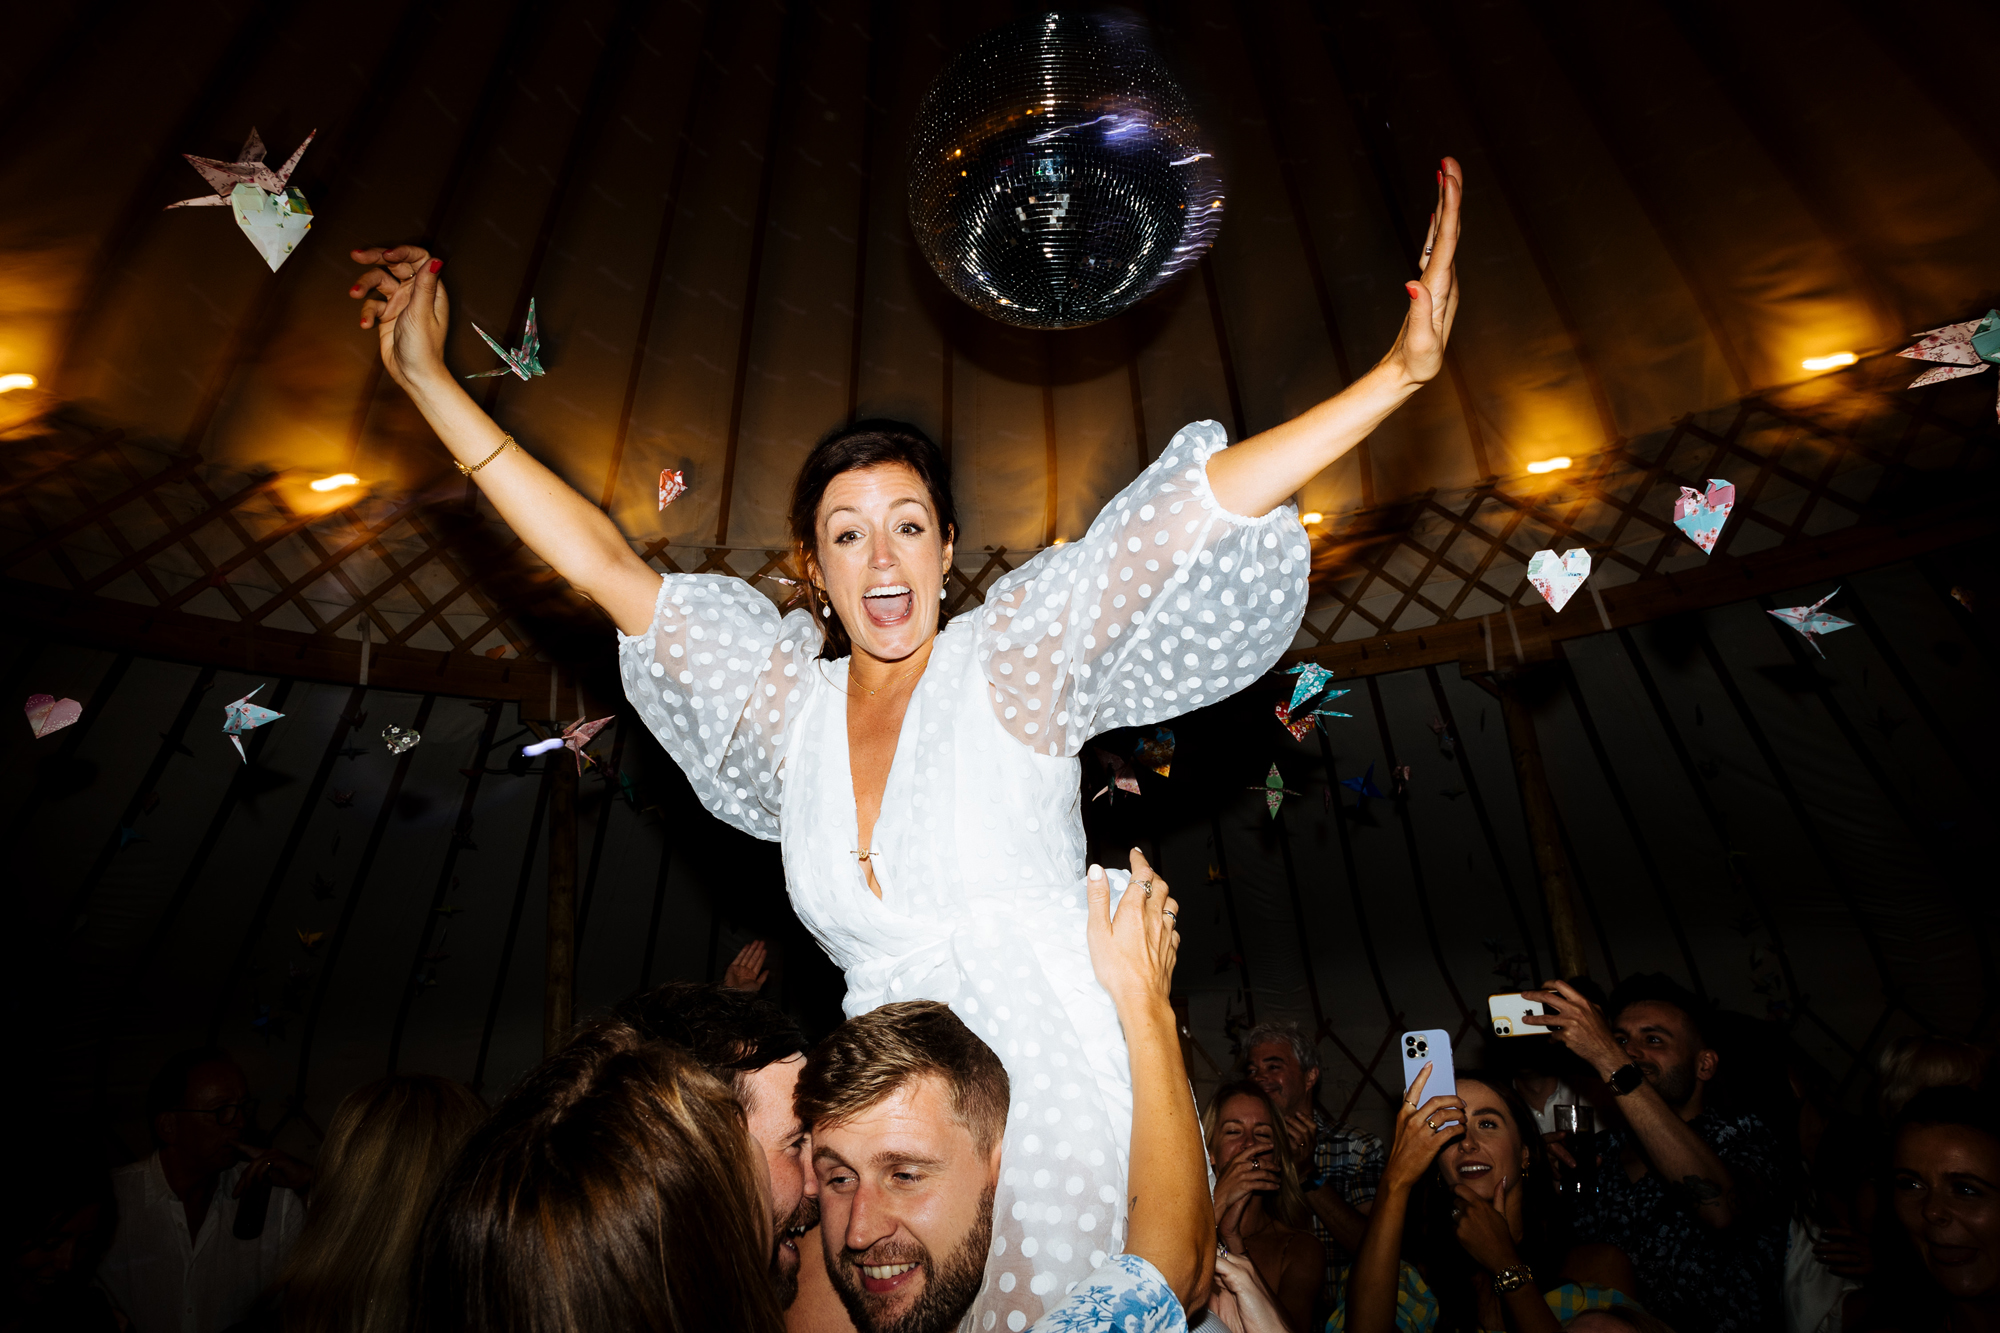 An epic intimate wedding party 